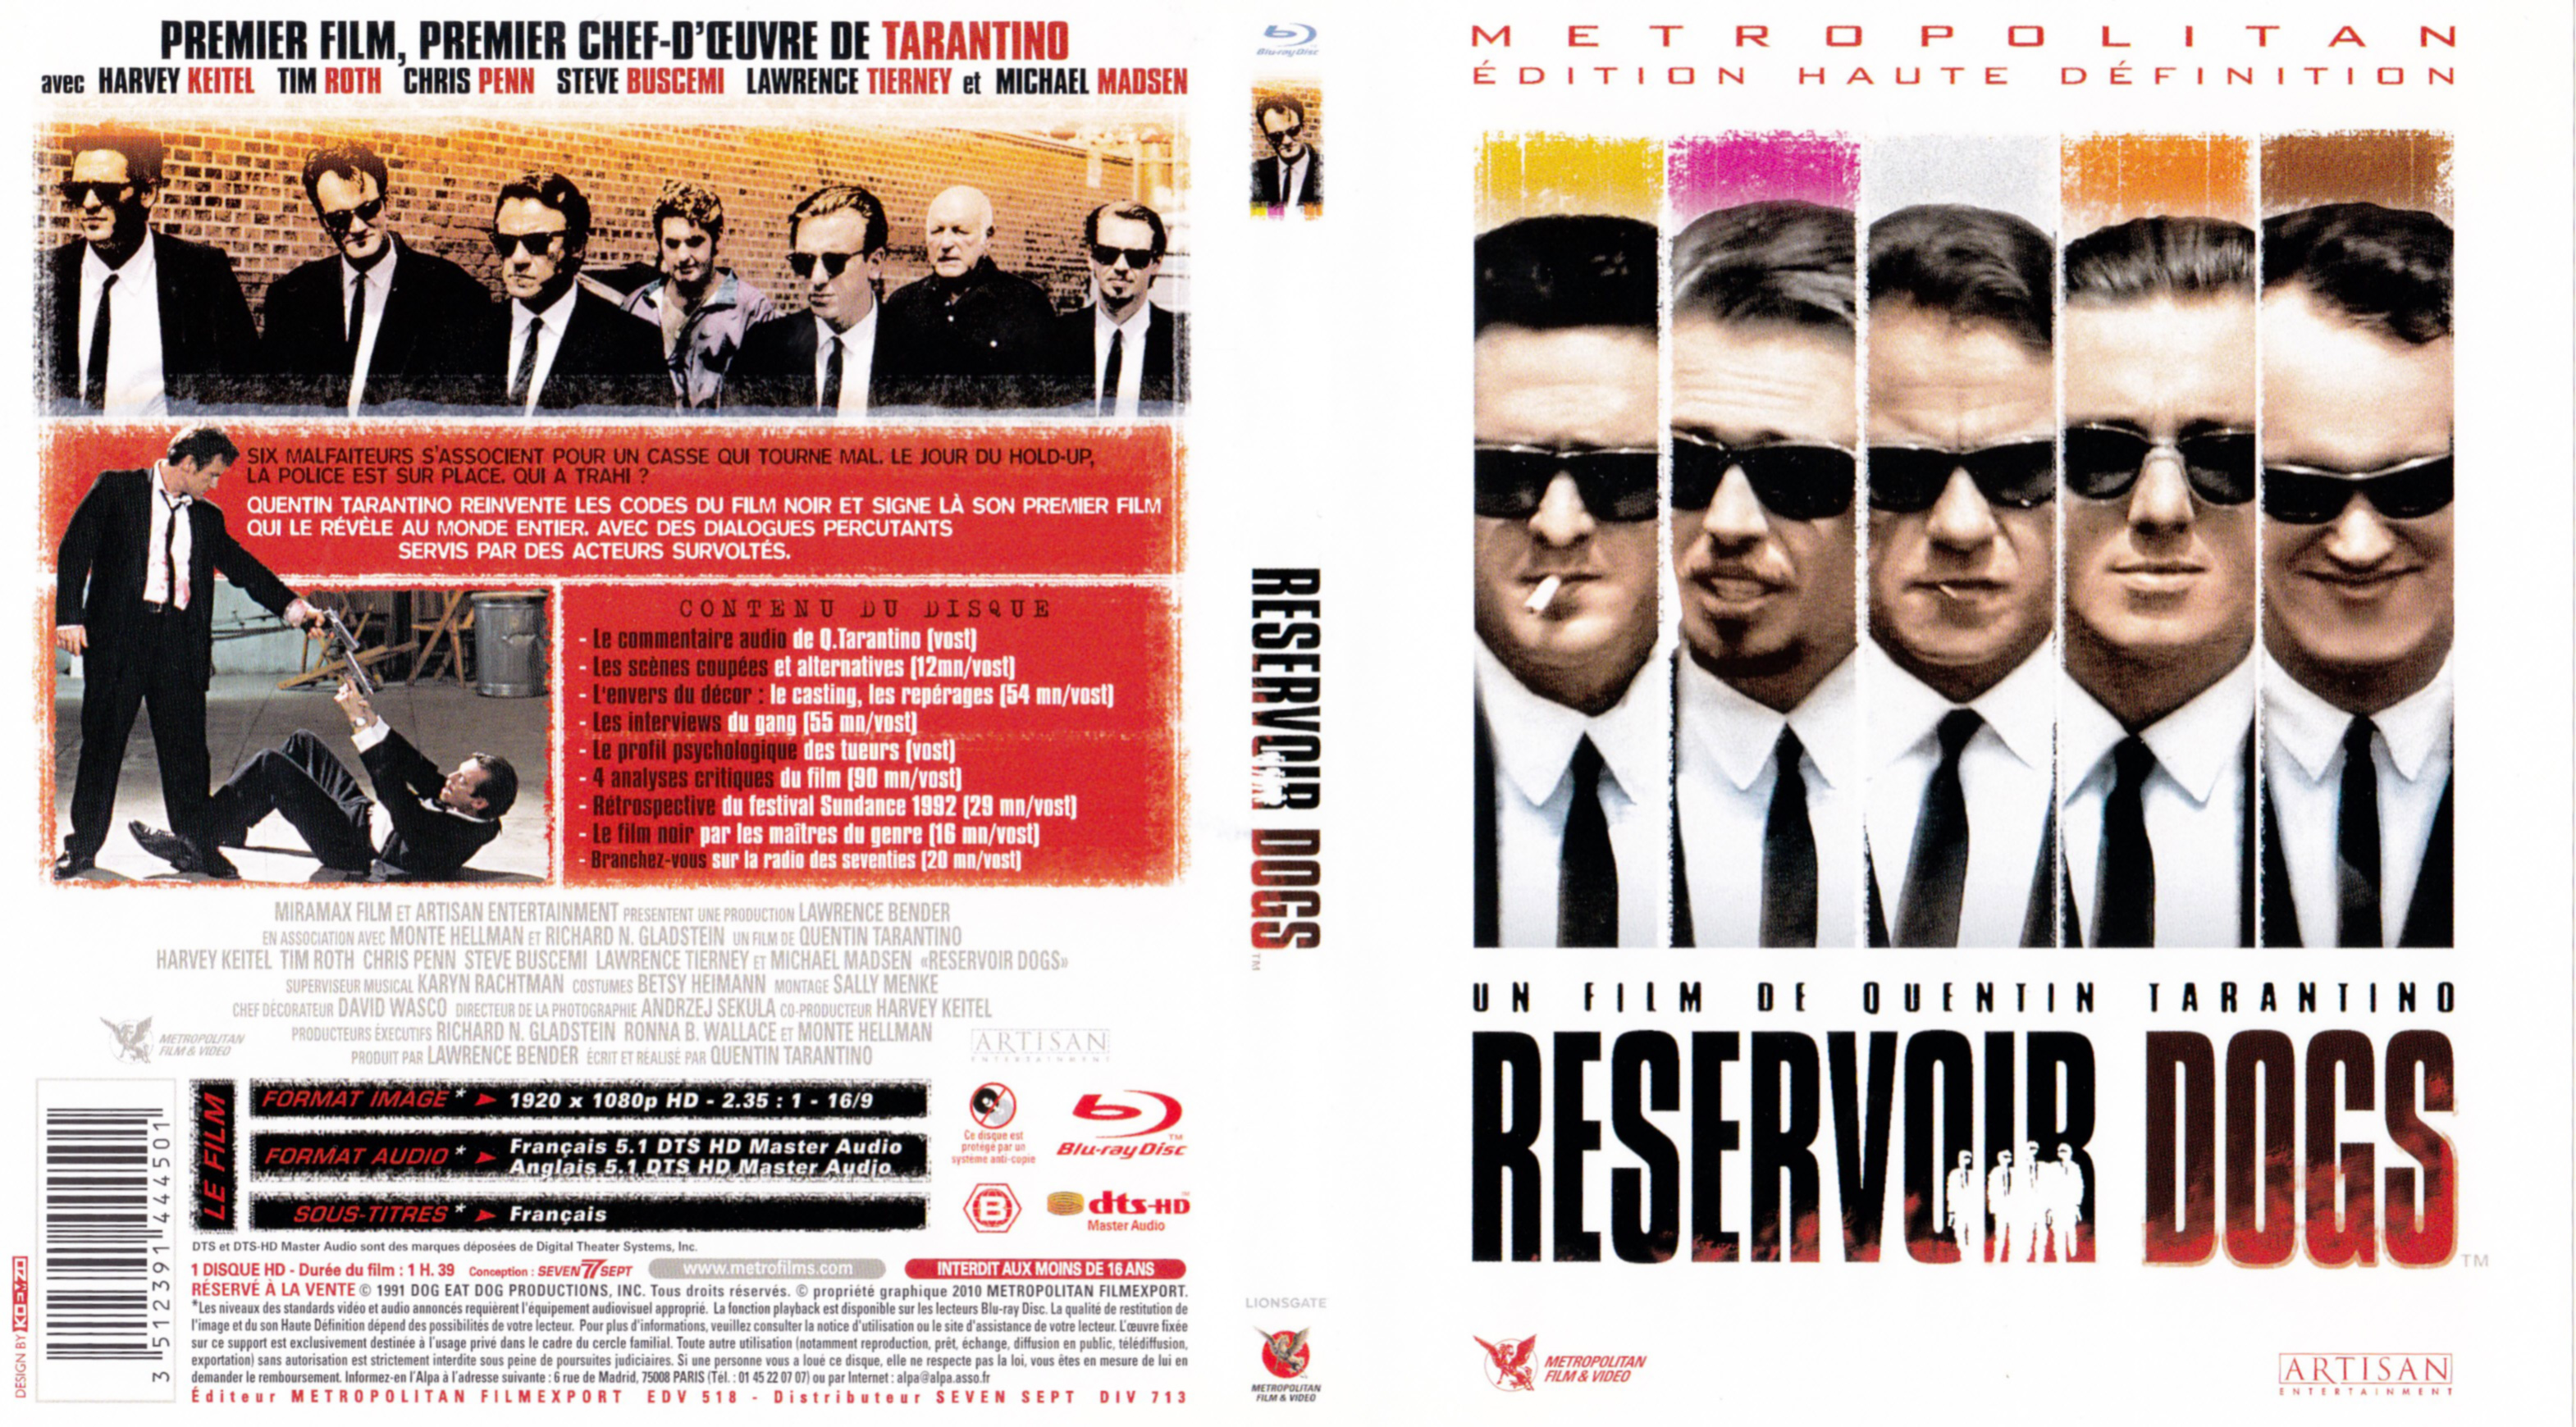 Jaquette DVD Reservoir Dogs (BLU-RAY)